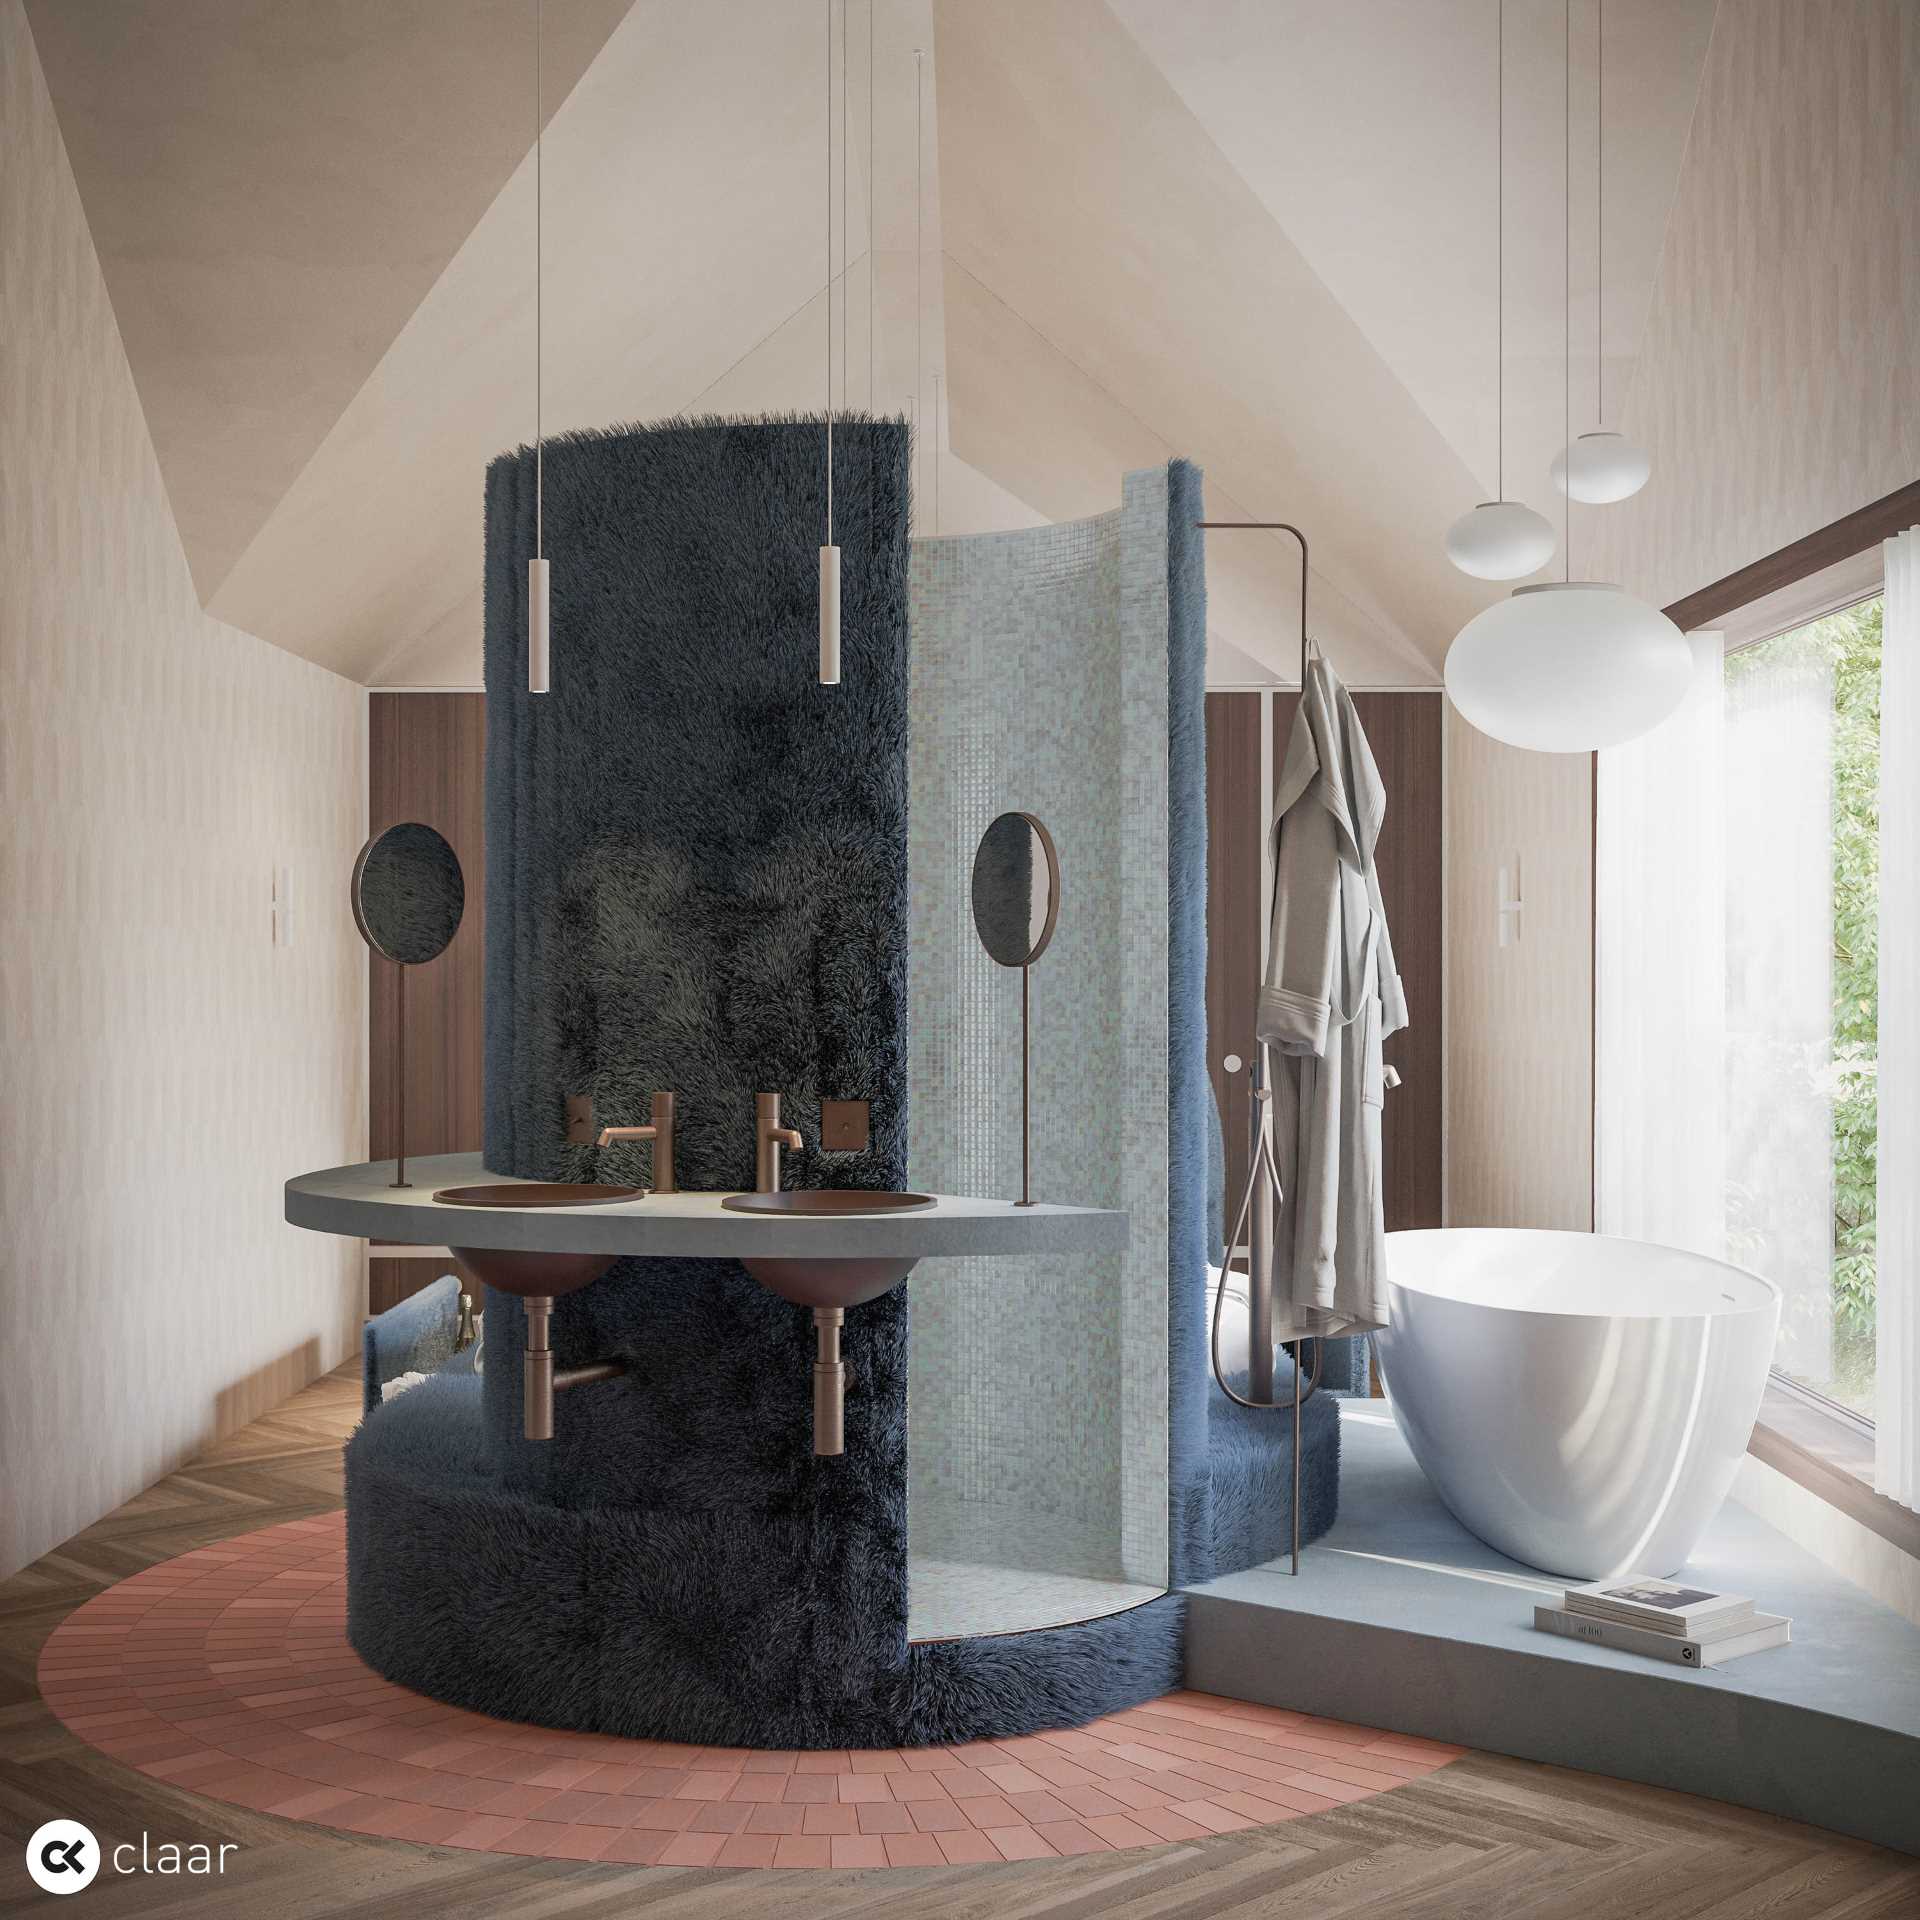 A hotel-inspired bedroom and bathroom suite with a circular shower, freestanding bathtub, double vanity, and lots of storage.